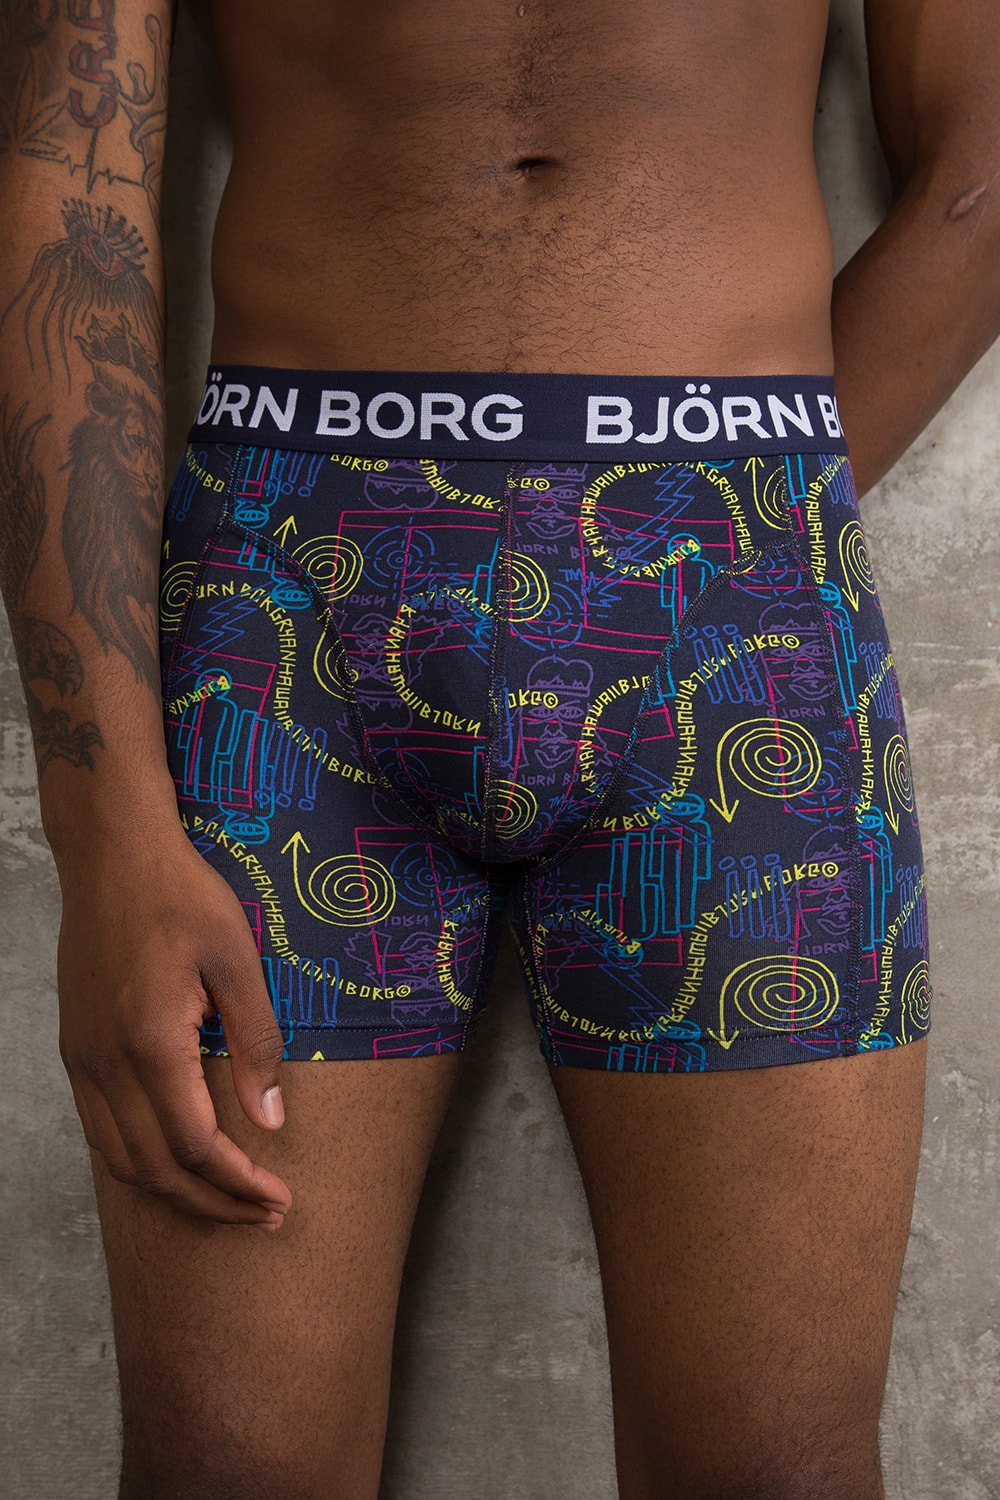 Bjorn Borg's new Performance Underwear collection is not what you